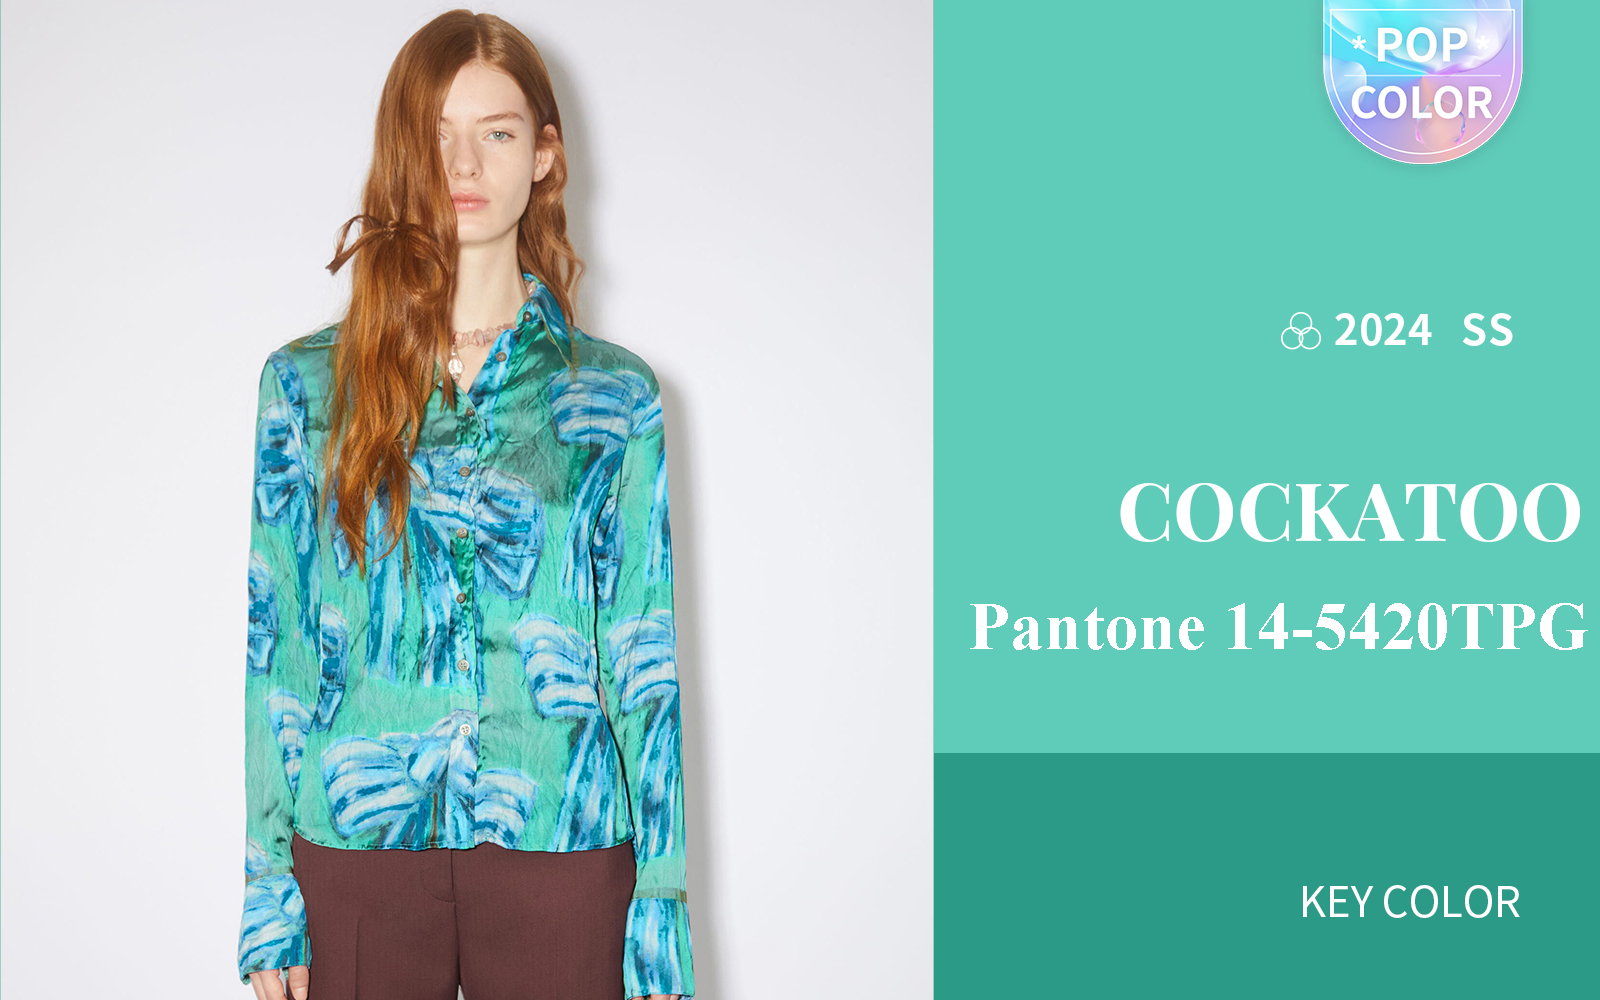 Cockatoo -- The Color Trend for Womenswear